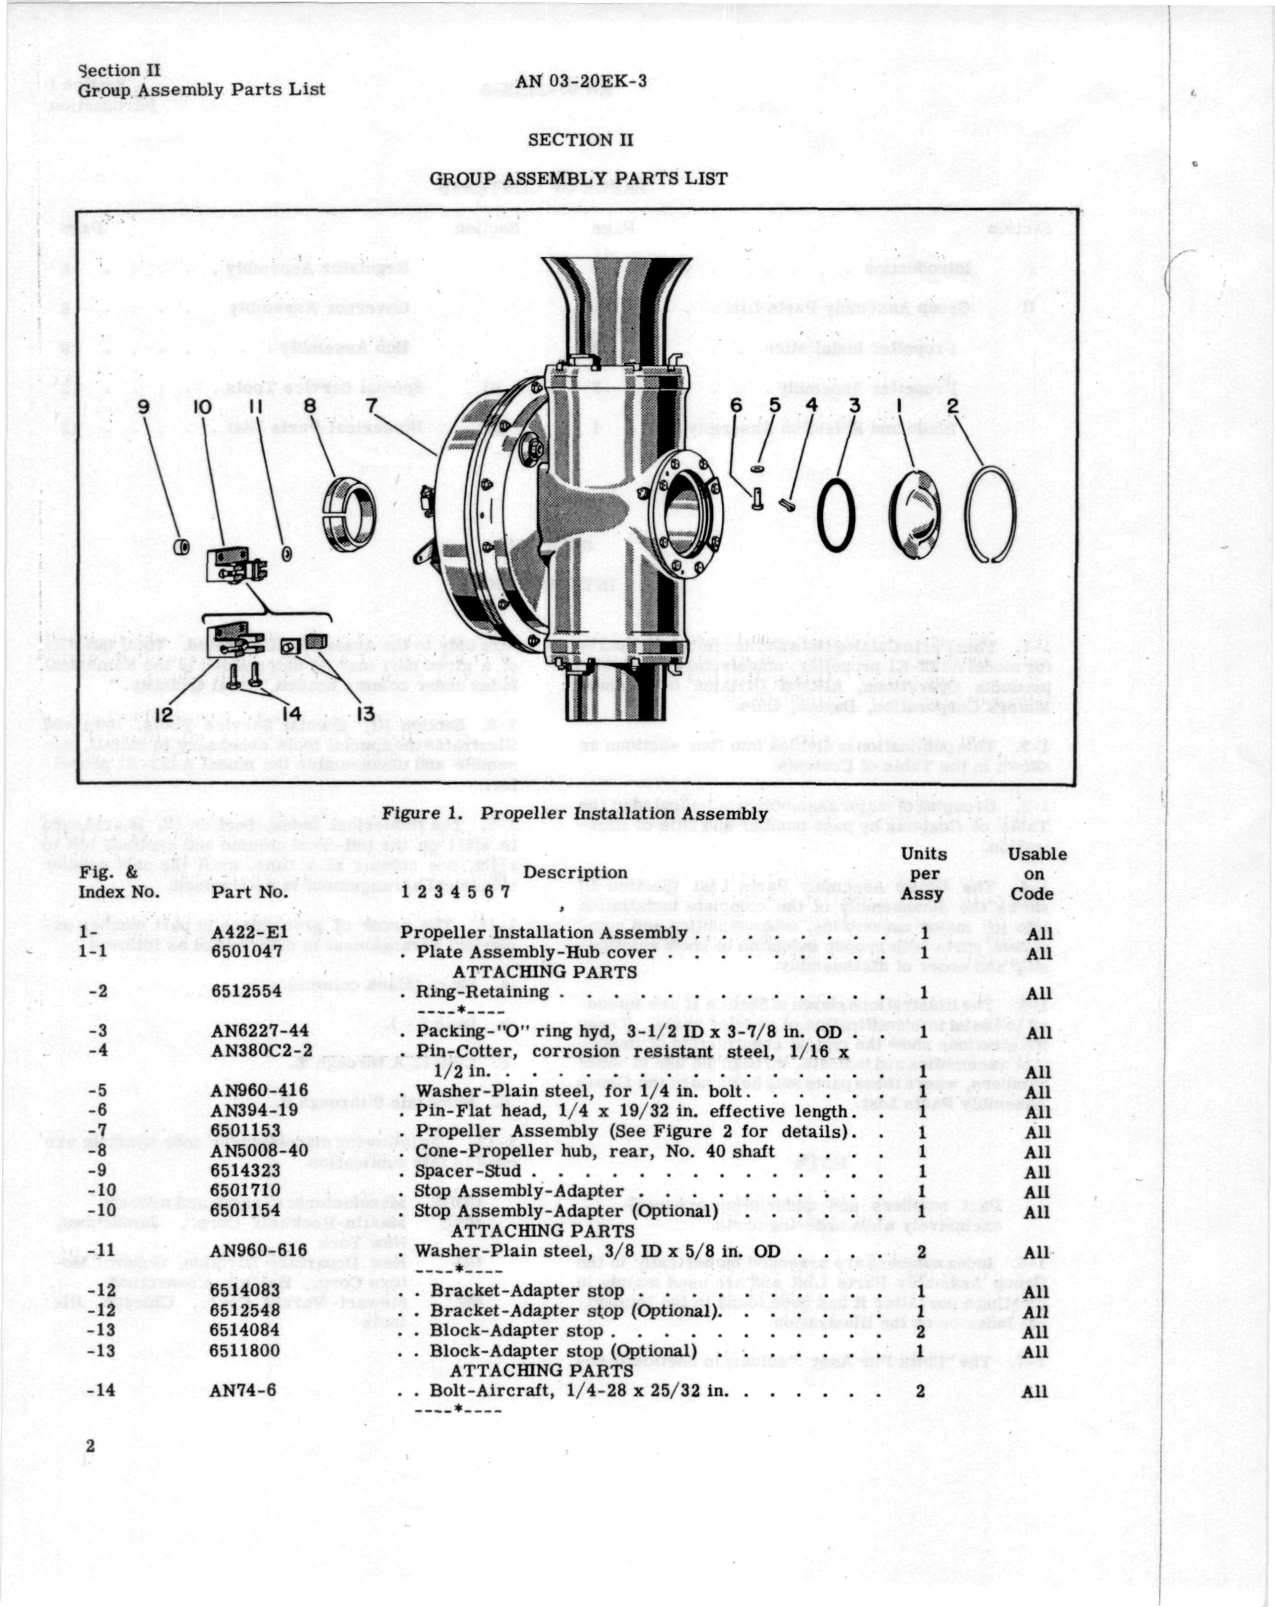 Sample page 4 from AirCorps Library document: Hydraulic Propeller Illustrated Parts Breakdown Model A422-E1